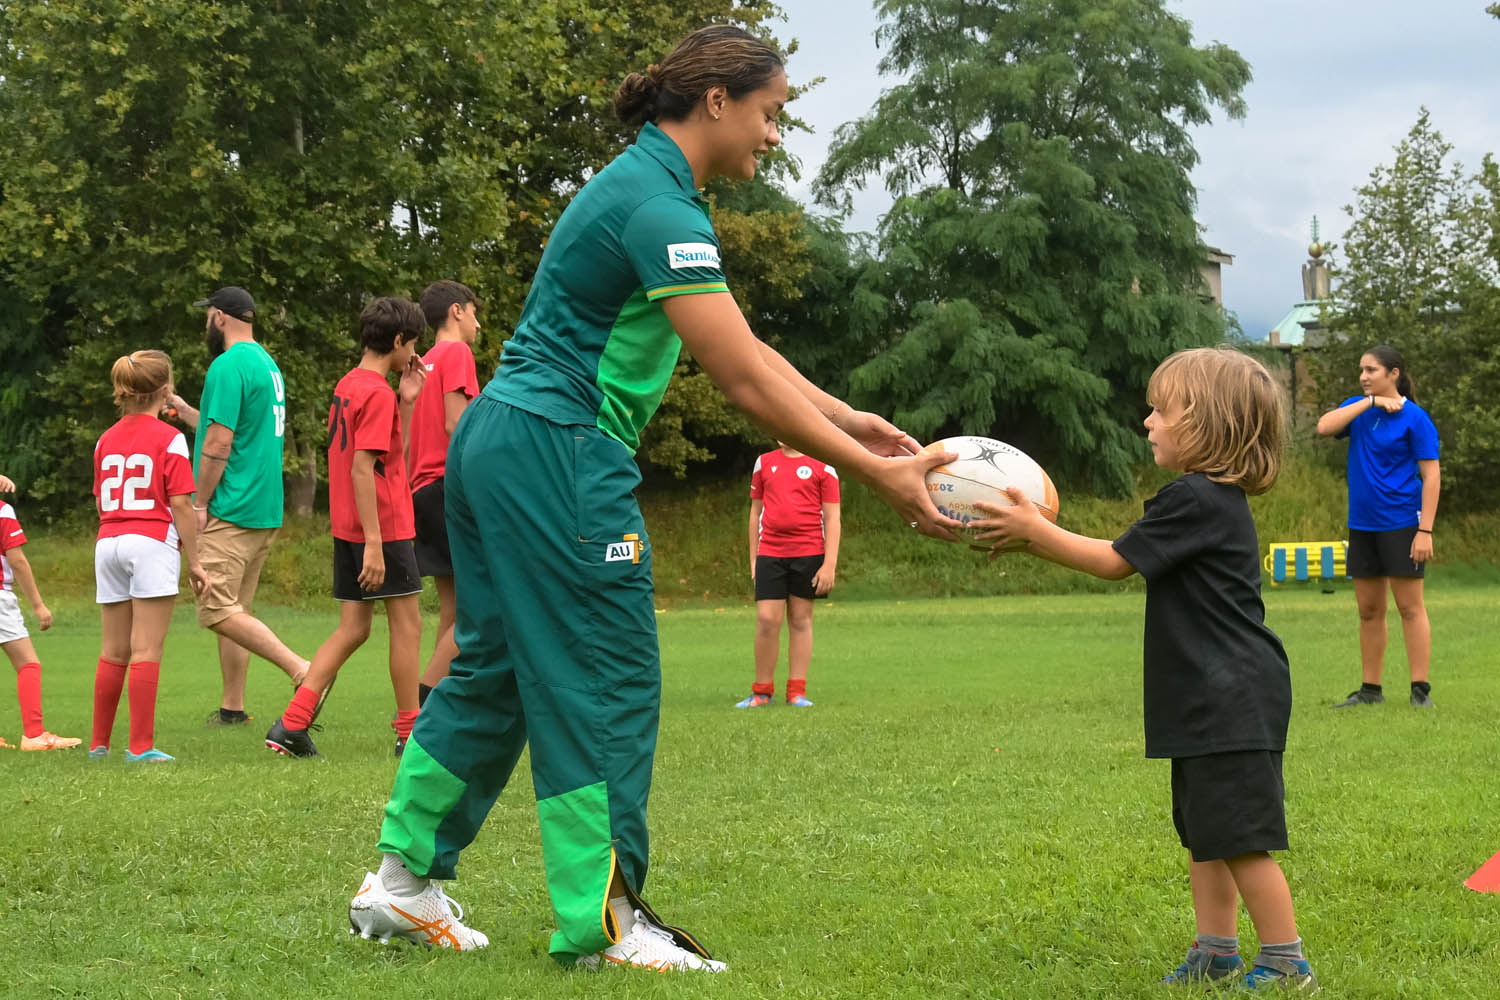 A rugby 7s player hands a ball to a child